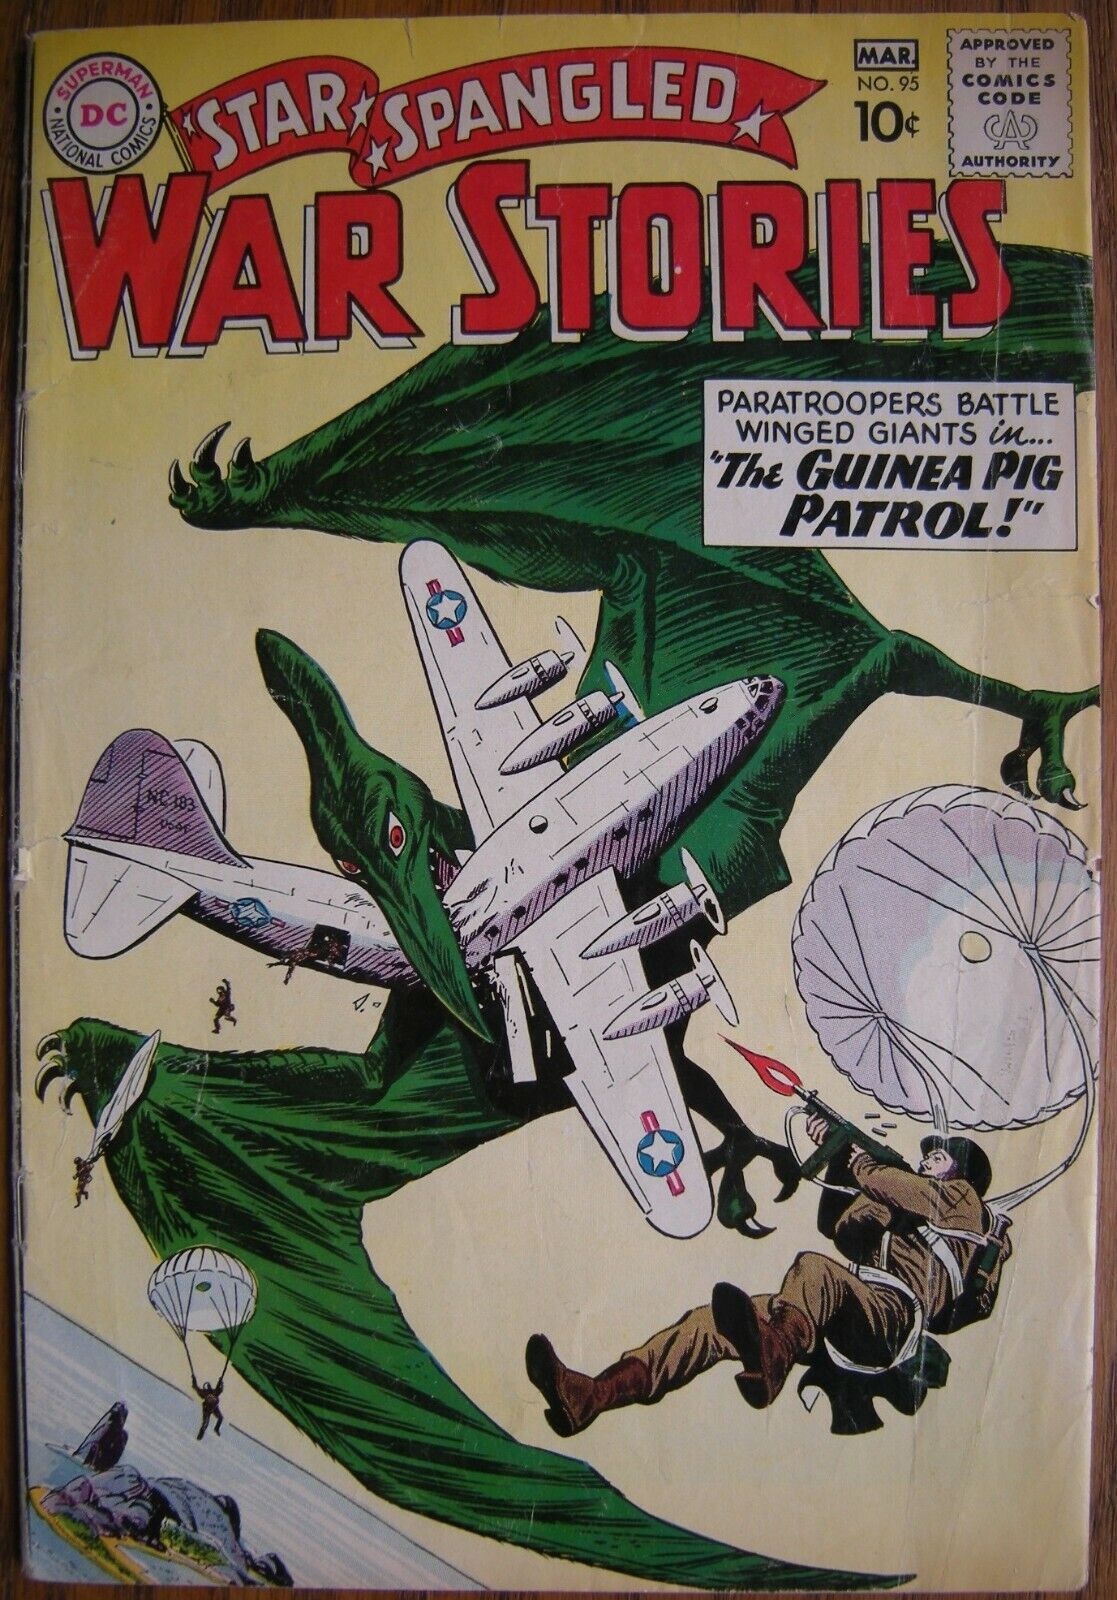 DC COMICS STAR SPANGLED WAR STORIES #95 1961 EARLY DINOSAURS SILVER AGE WAR